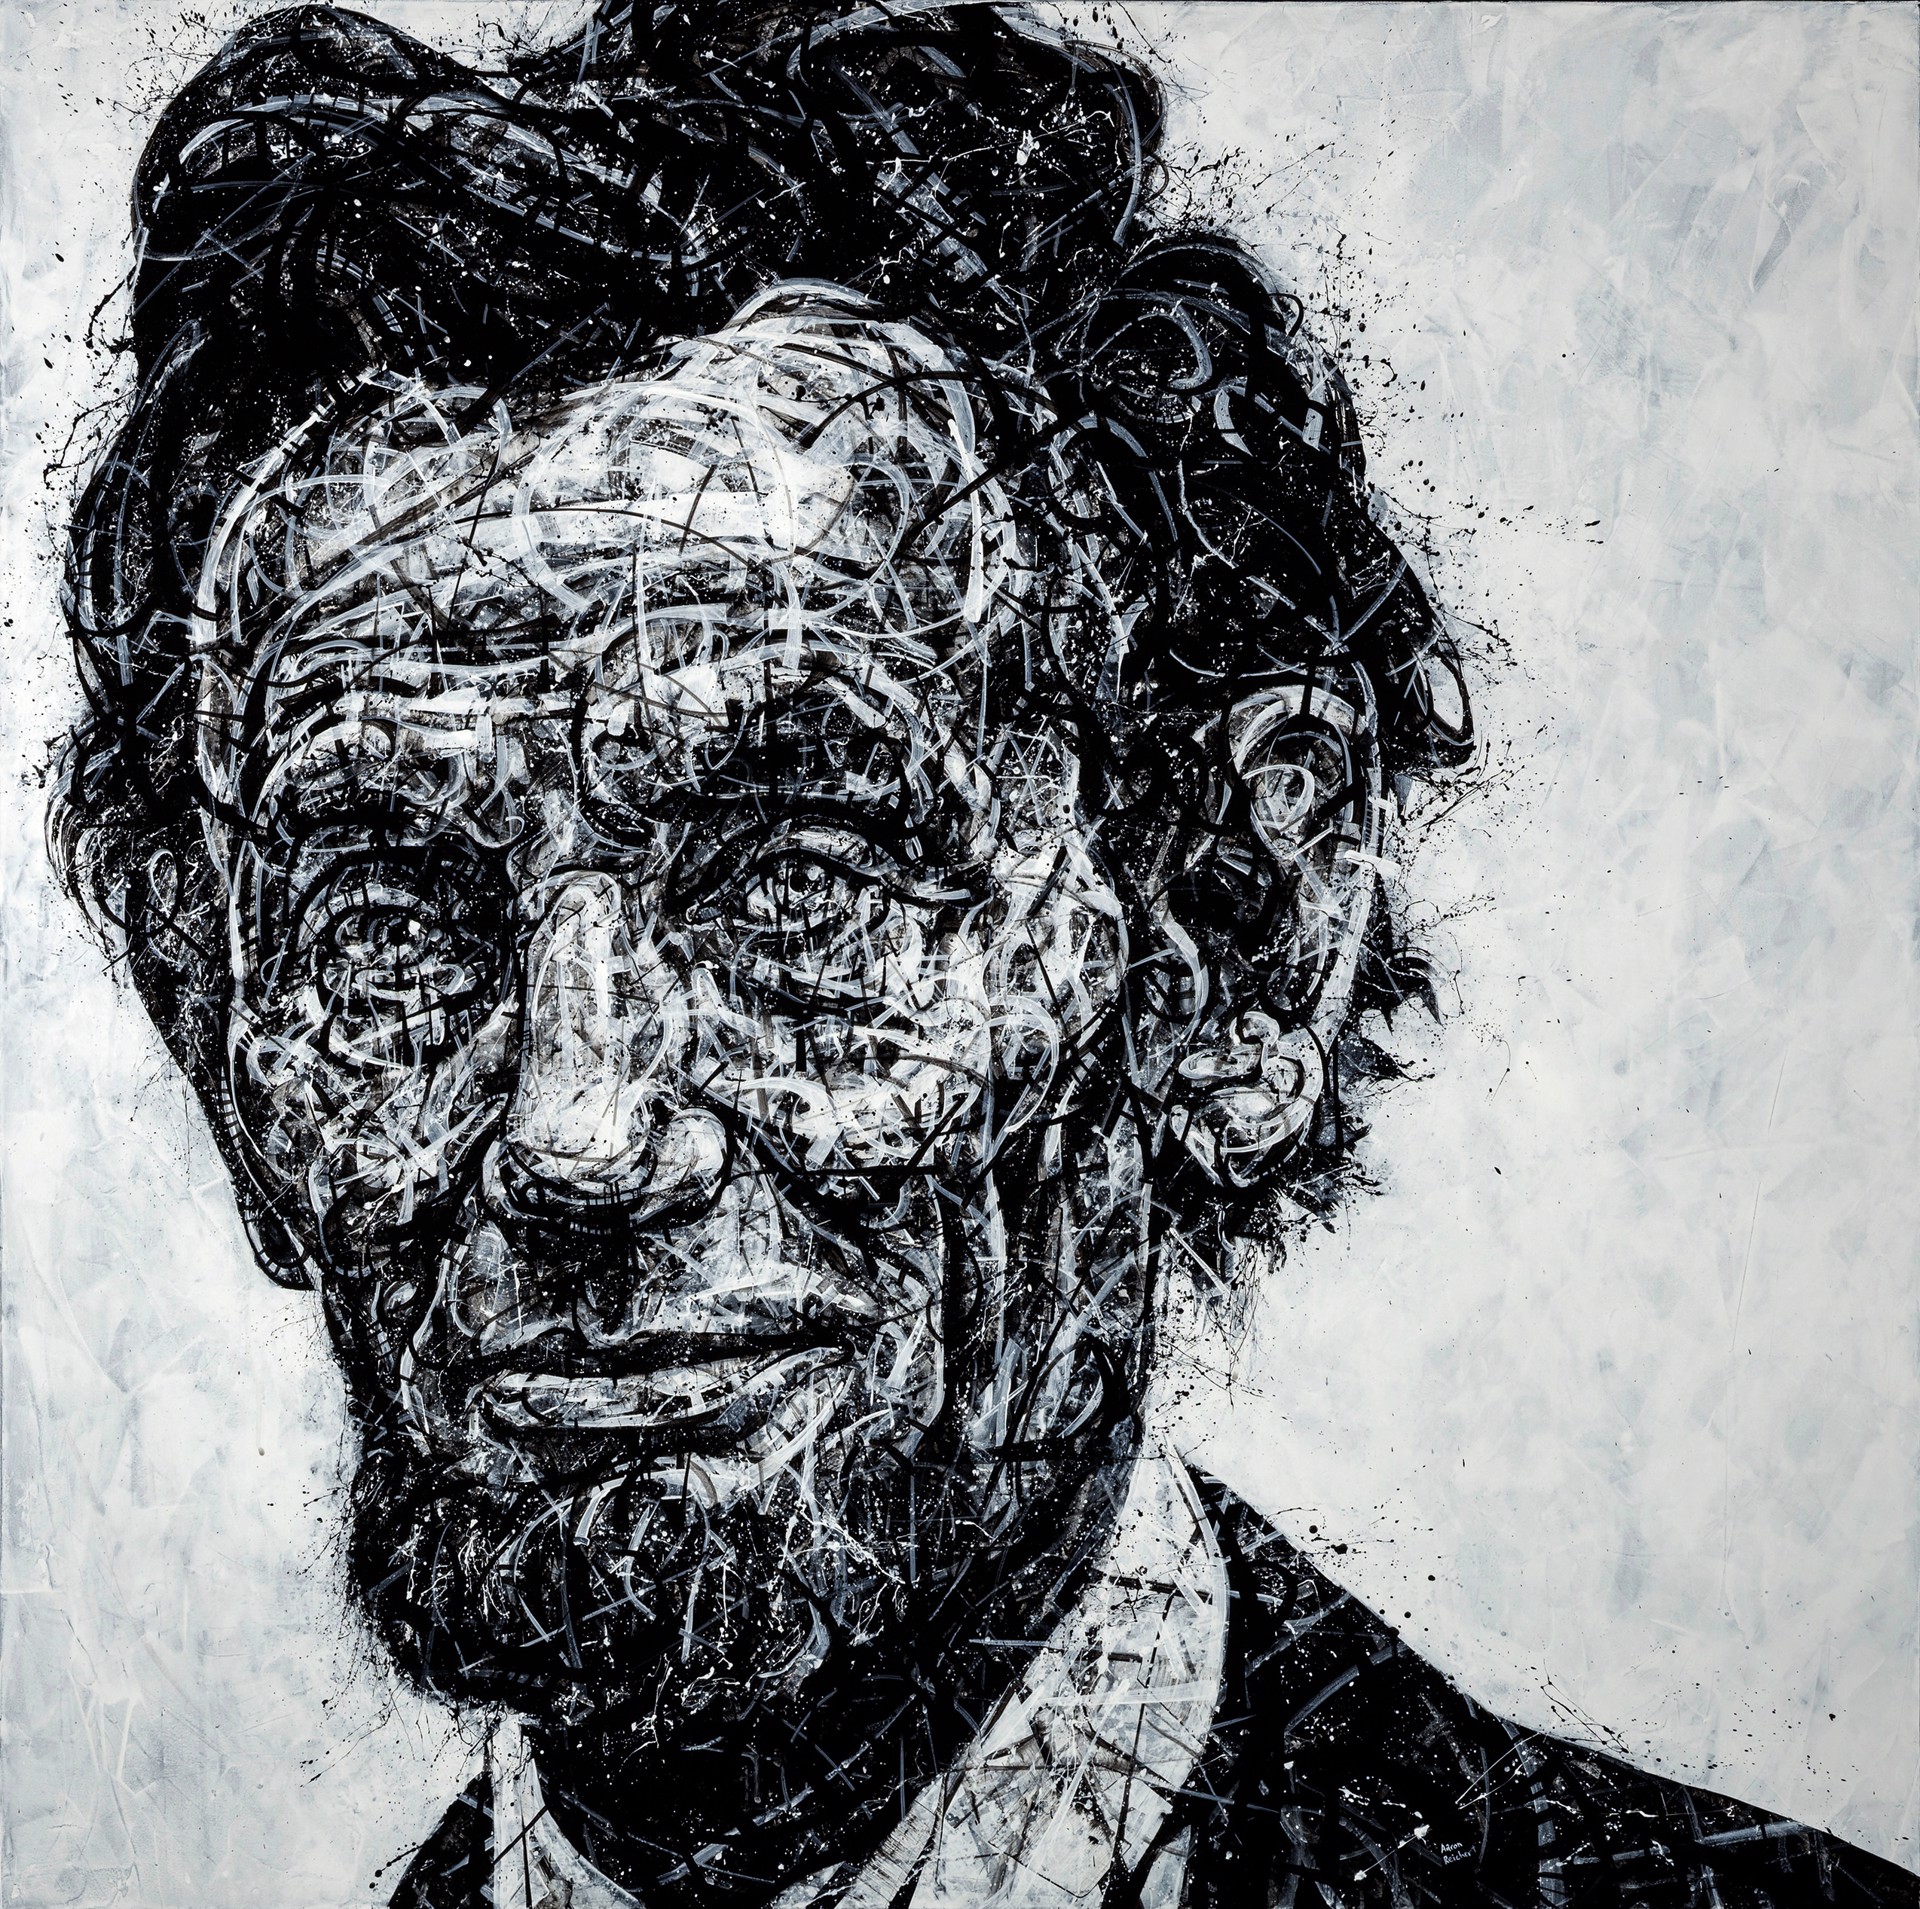 Lincoln in DC by Aaron Reichert